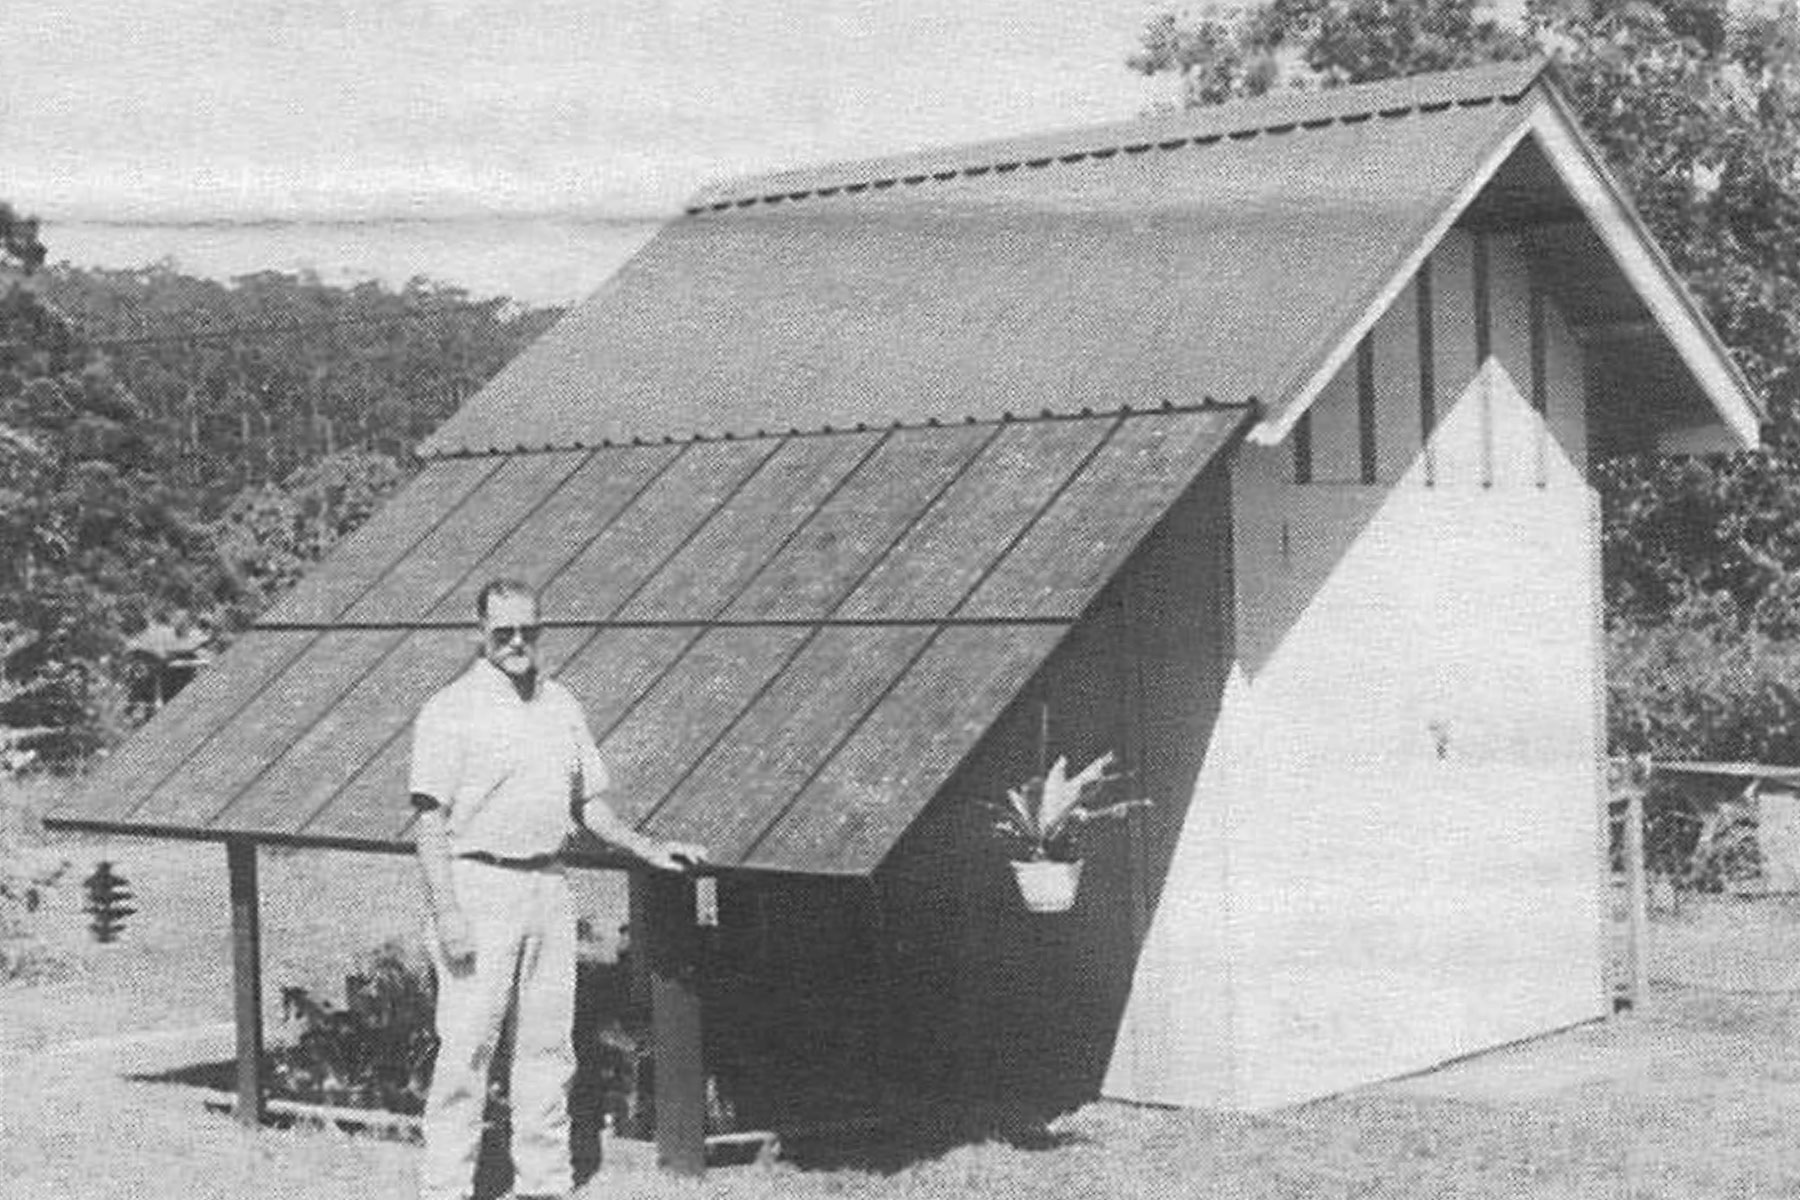 Peter Shackelford in front of an early solar installation, 1992